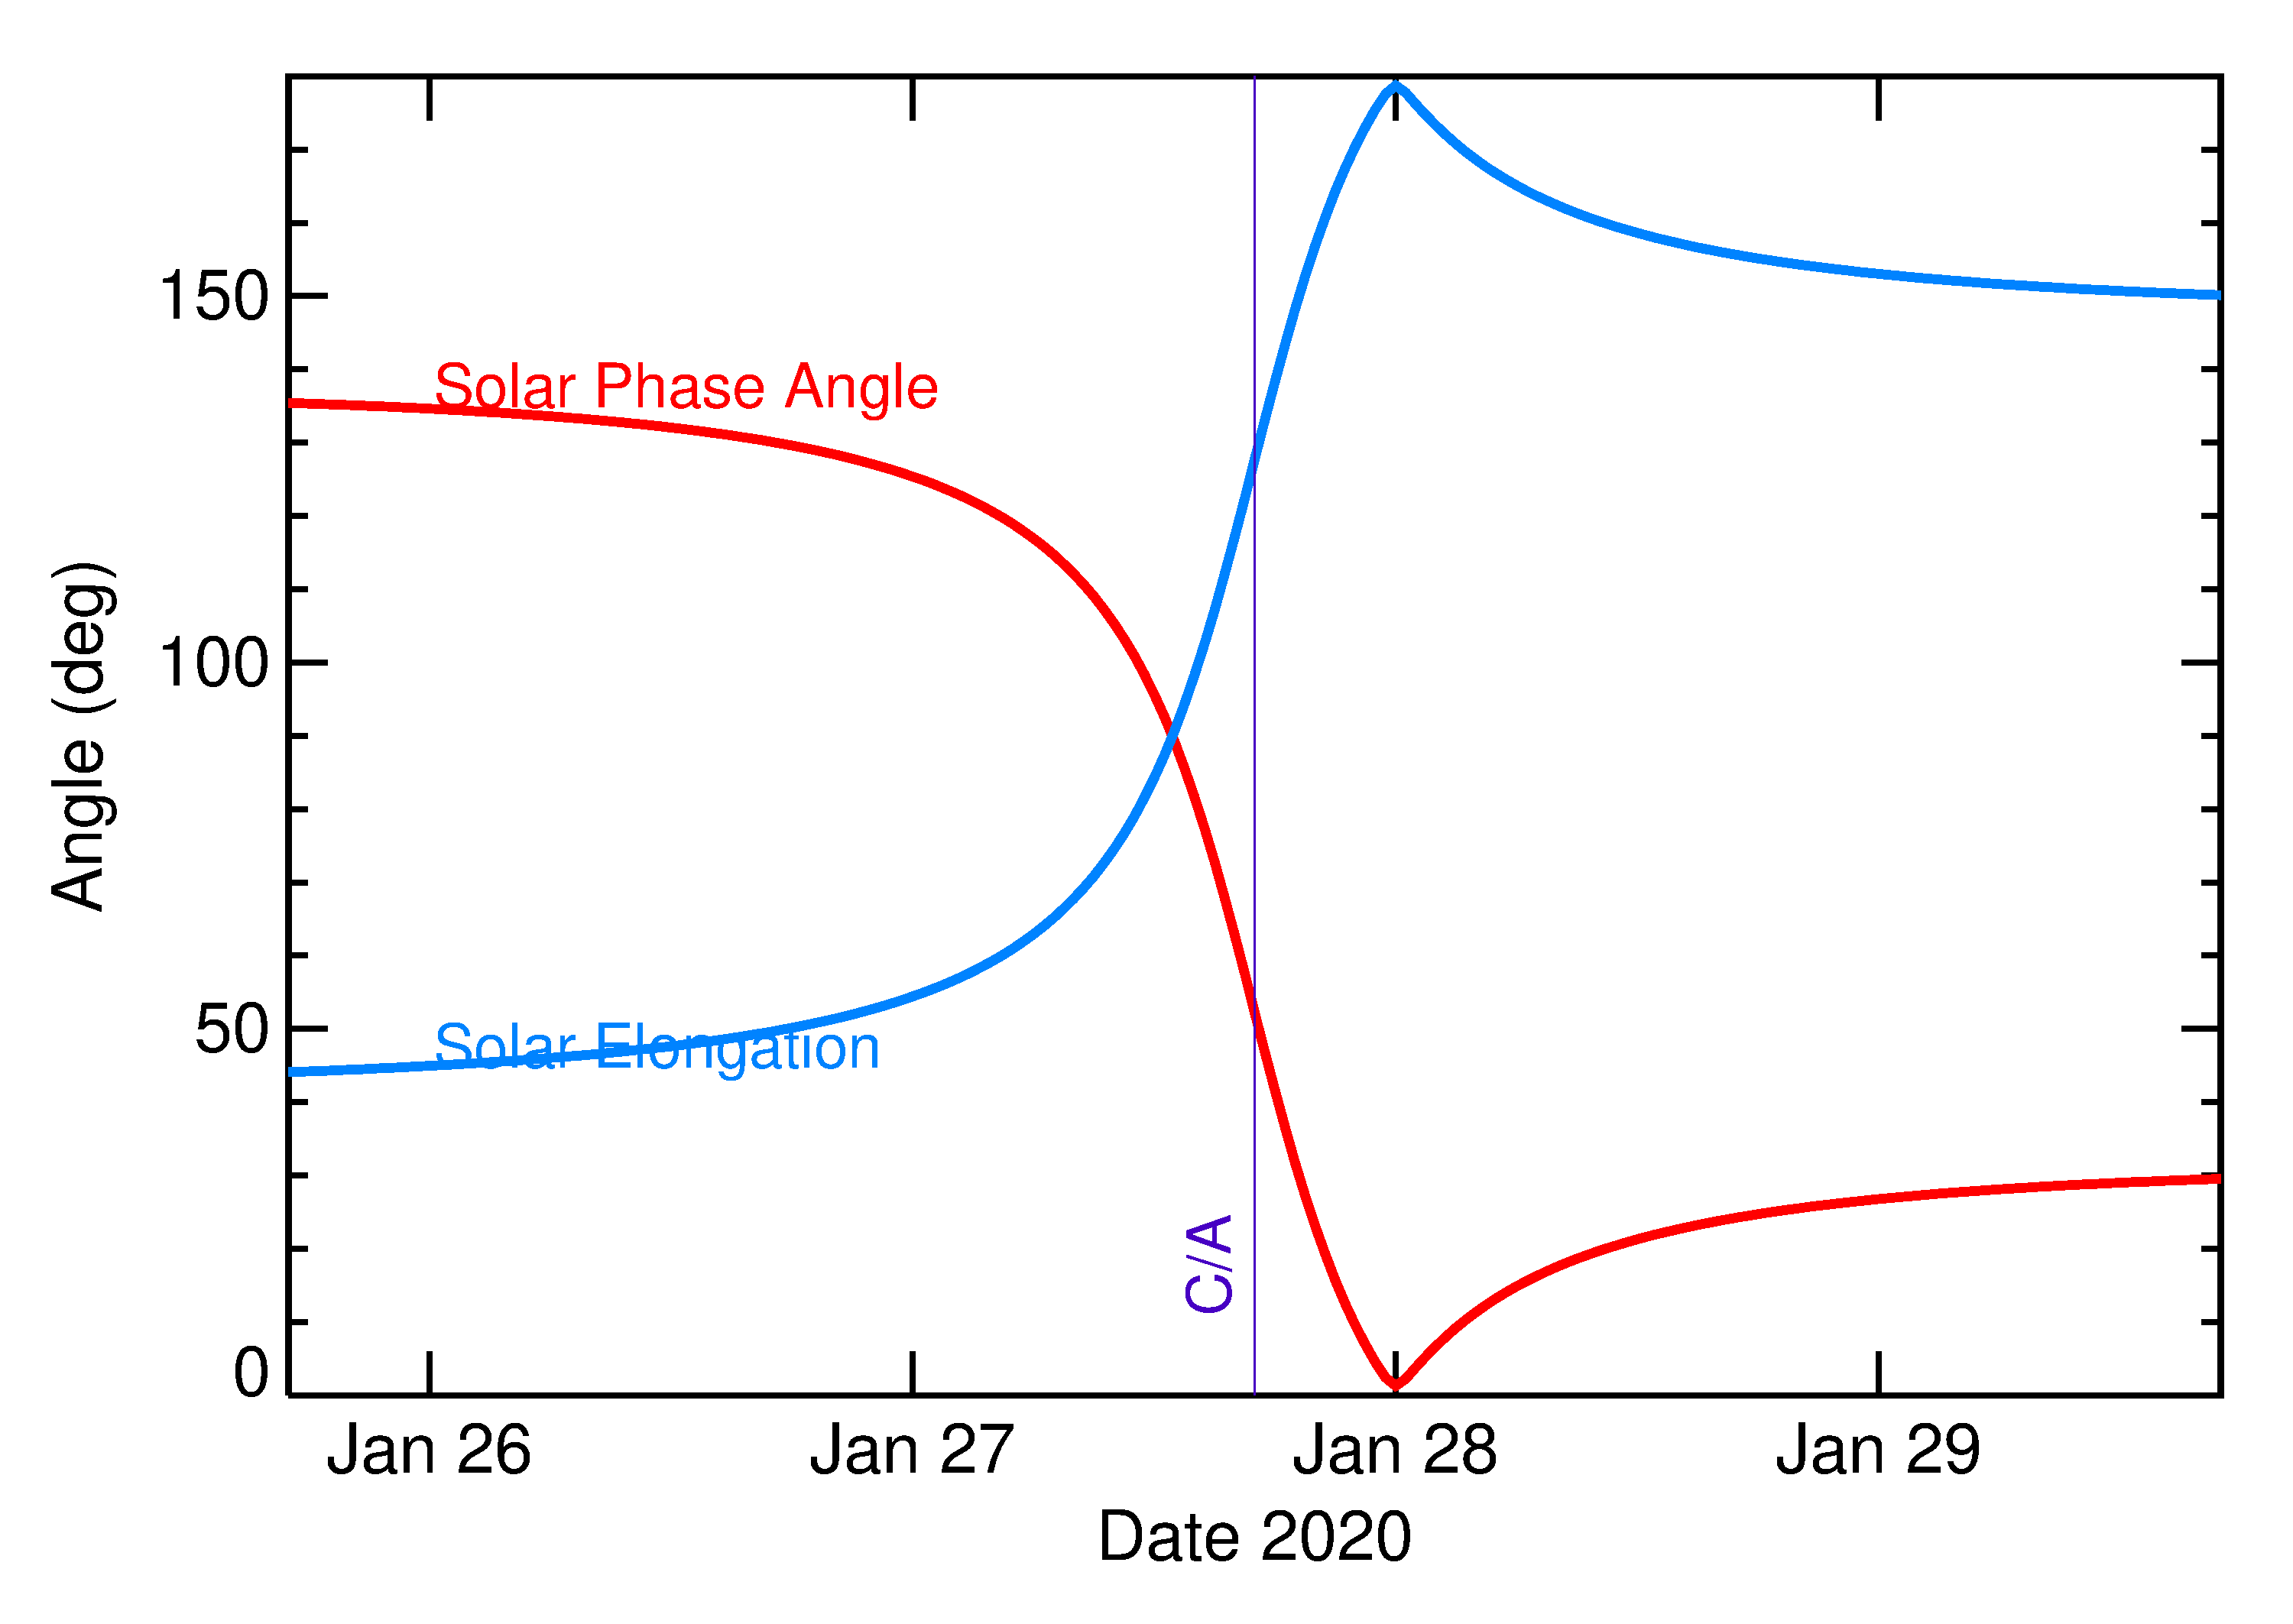 Solar Elongation and Solar Phase Angle of 2020 BA13 in the days around closest approach